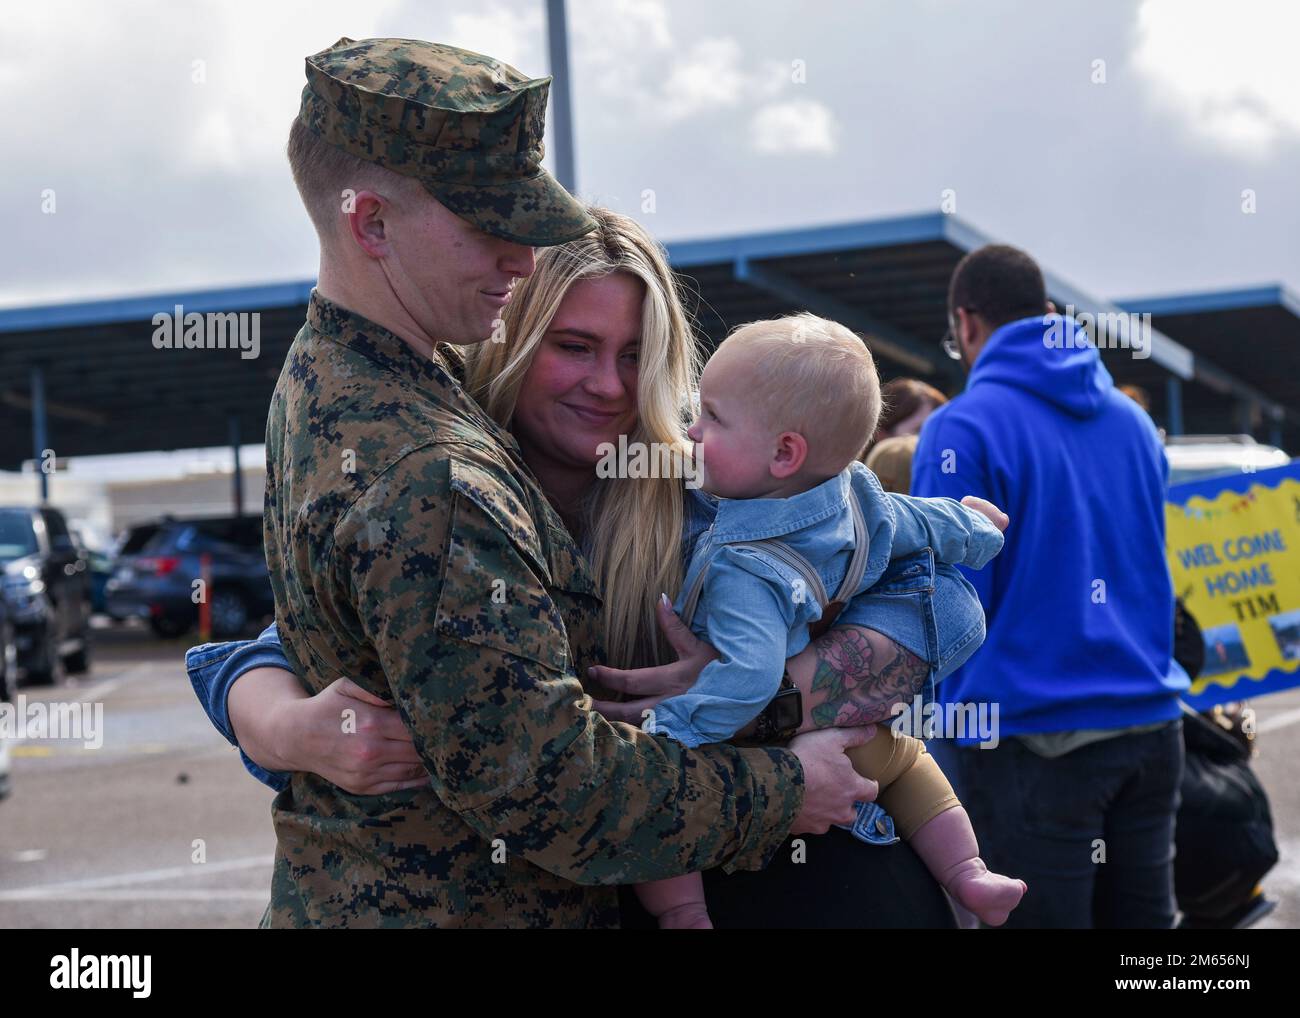 SAN DIEGO (March 4, 2022) U.S. Marine Corps Capt. Mark Henderson, from New Bern, N.C., reunites with his family after completing a seven-month deployment aboard amphibious assault ship USS Essex (LHD 2). Essex, a part of the Essex Amphibious Ready Group, returned to Naval Base San Diego, March 4, after a deployment to U.S. 3rd, 5th, and 7th Fleet areas of operation in support of regional stability and a free and open Indo-Pacific. Stock Photo